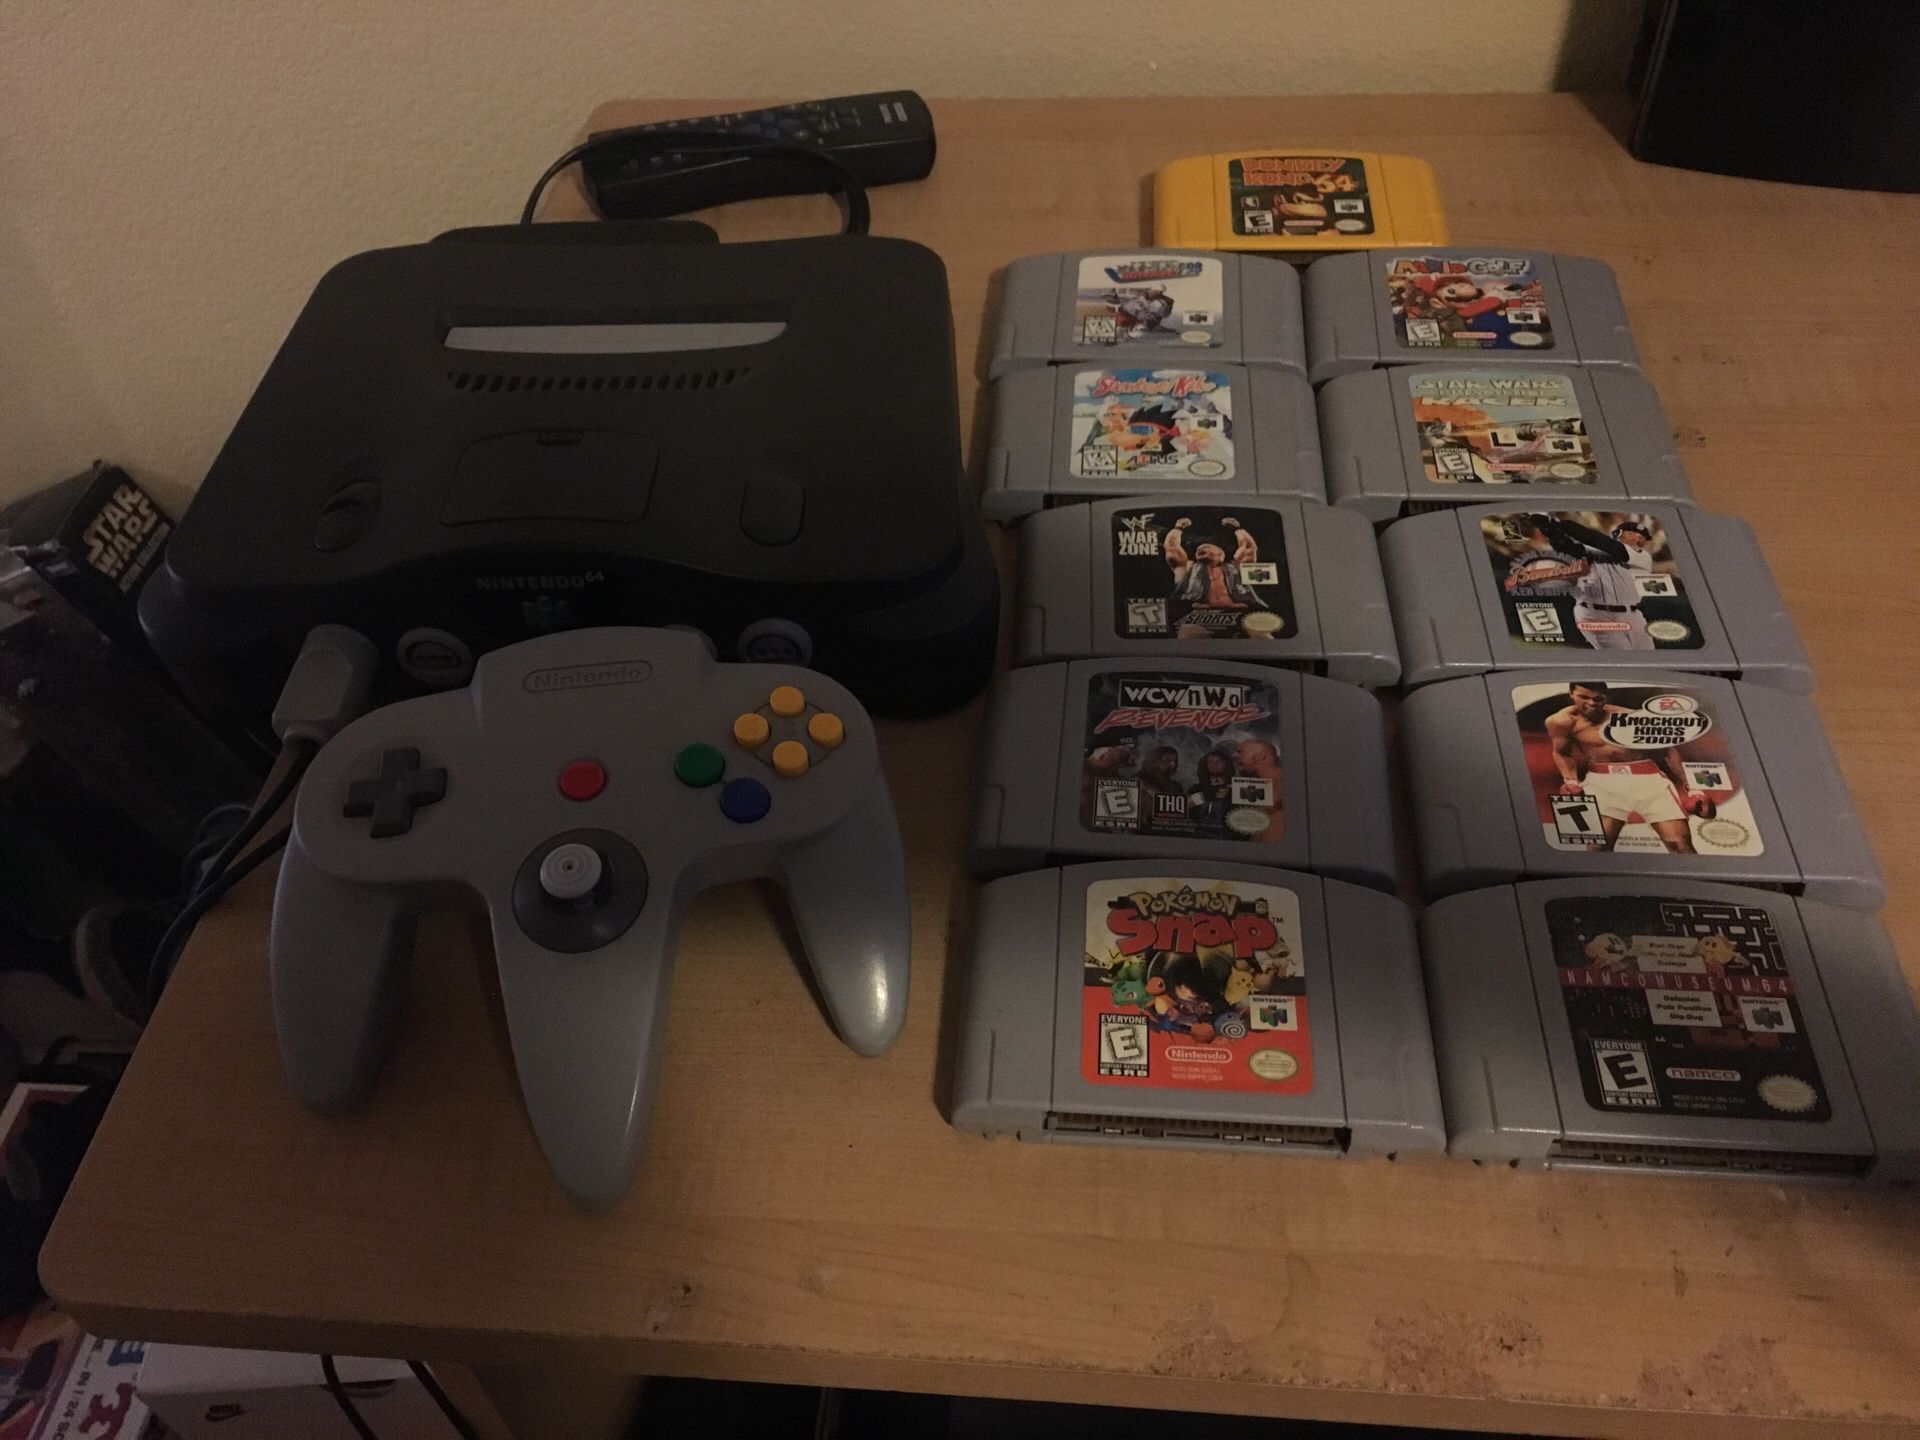 Nintendo 64 w/ 9 games and expansion. works great